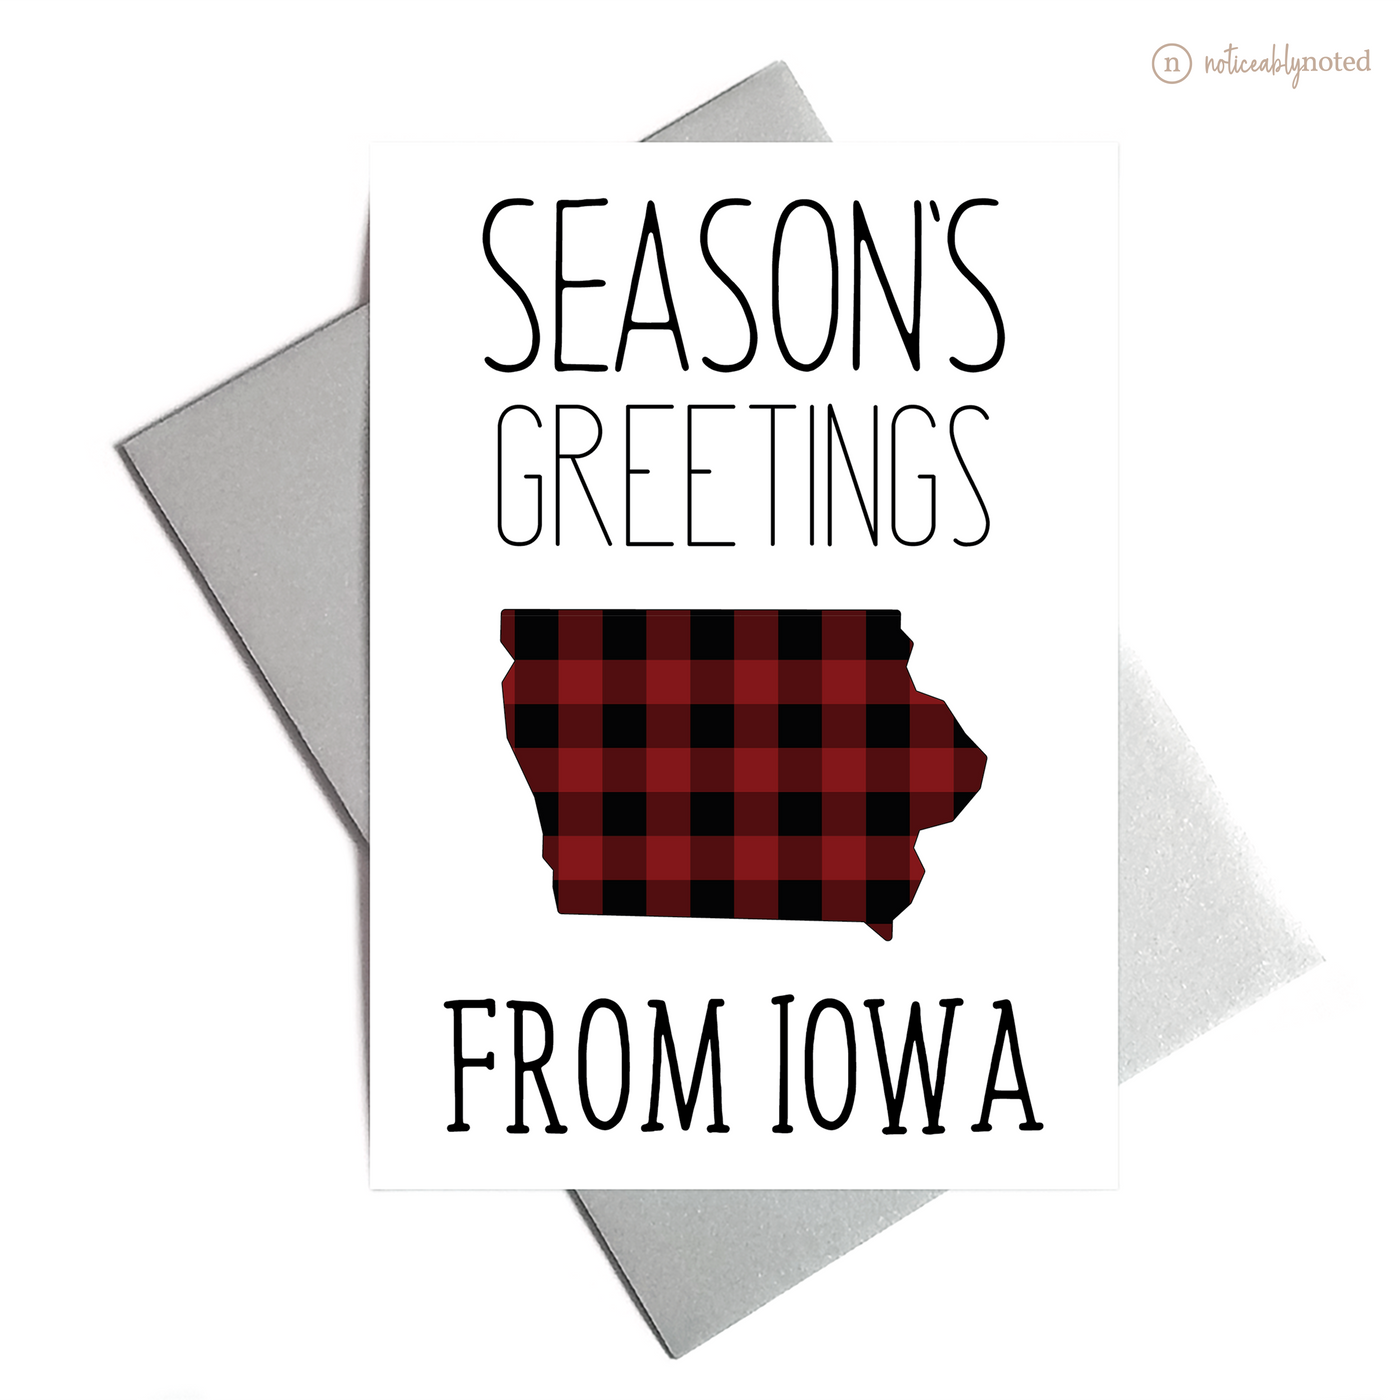 Iowa Christmas Cards | Noticeably Noted